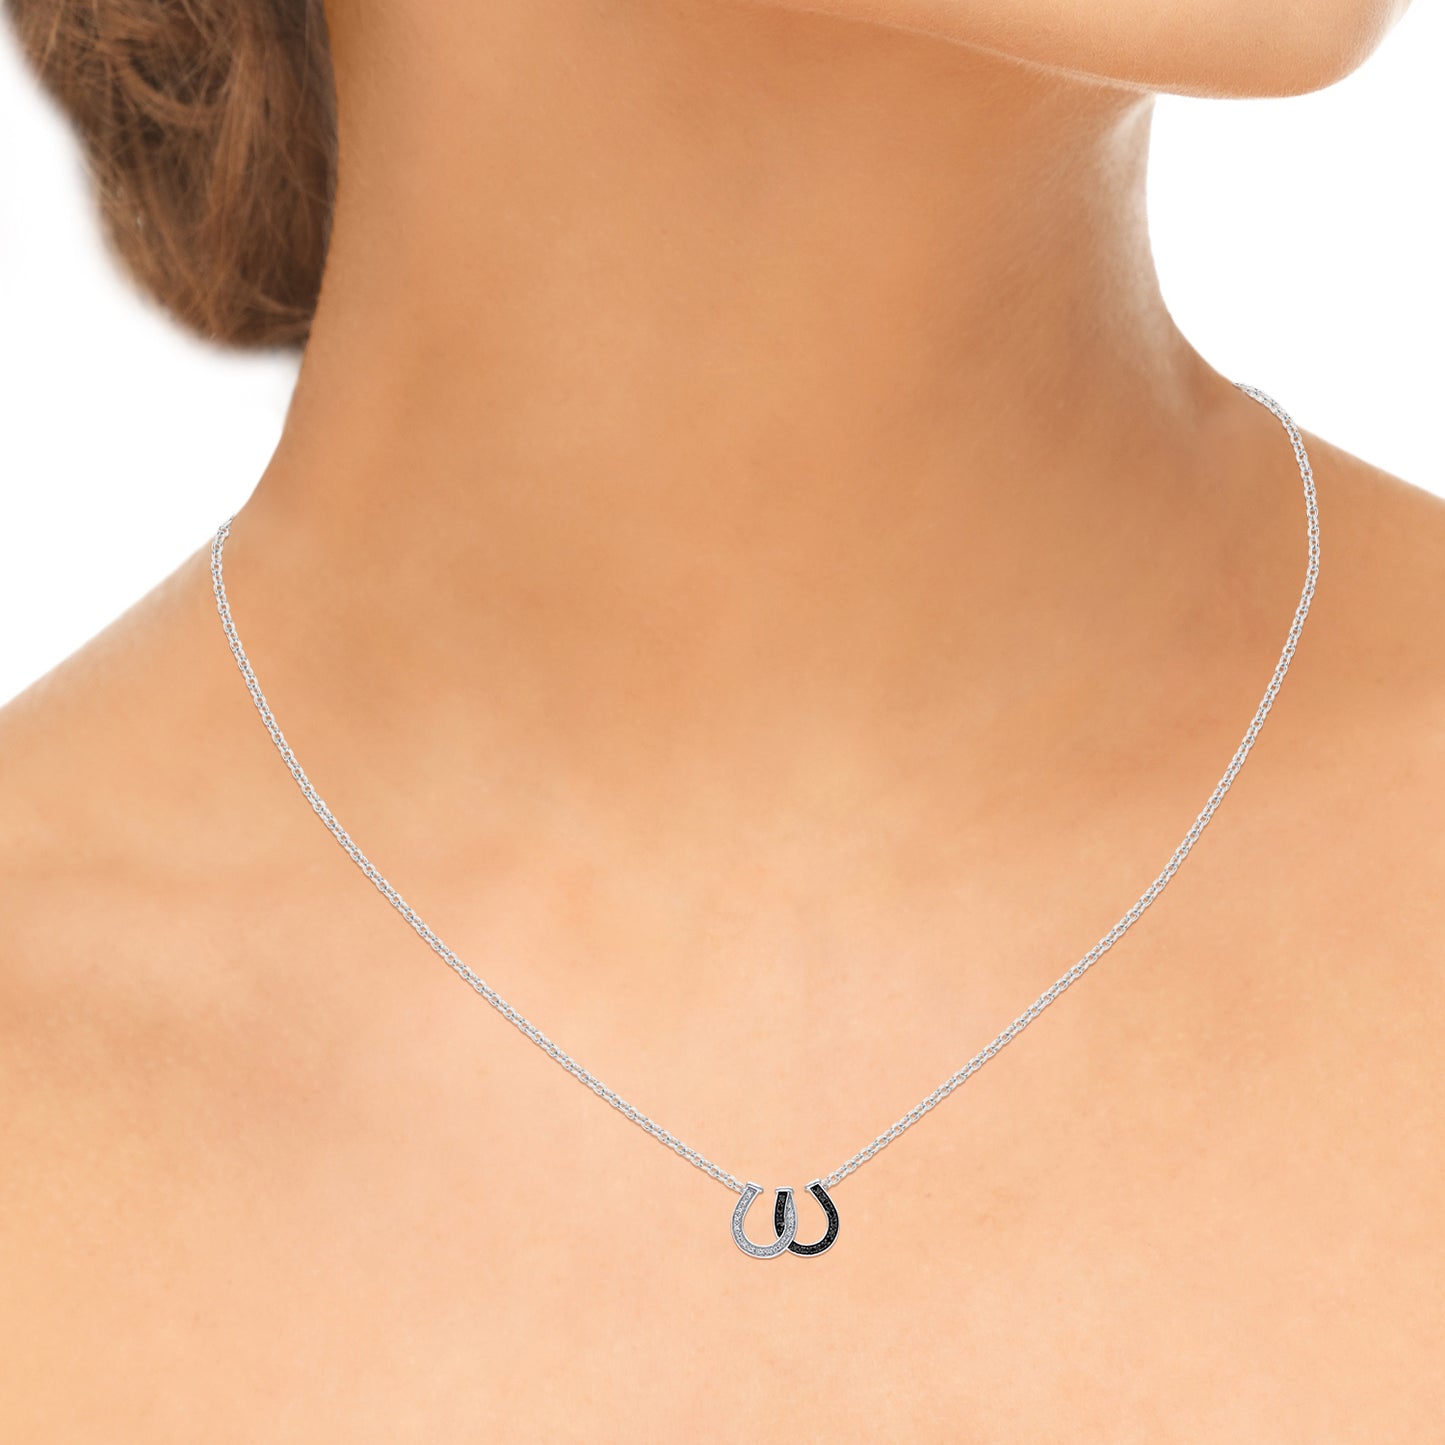 Treated Black Diamond Intertwined Horseshoe Pendant Necklace in 925 Sterling Silver